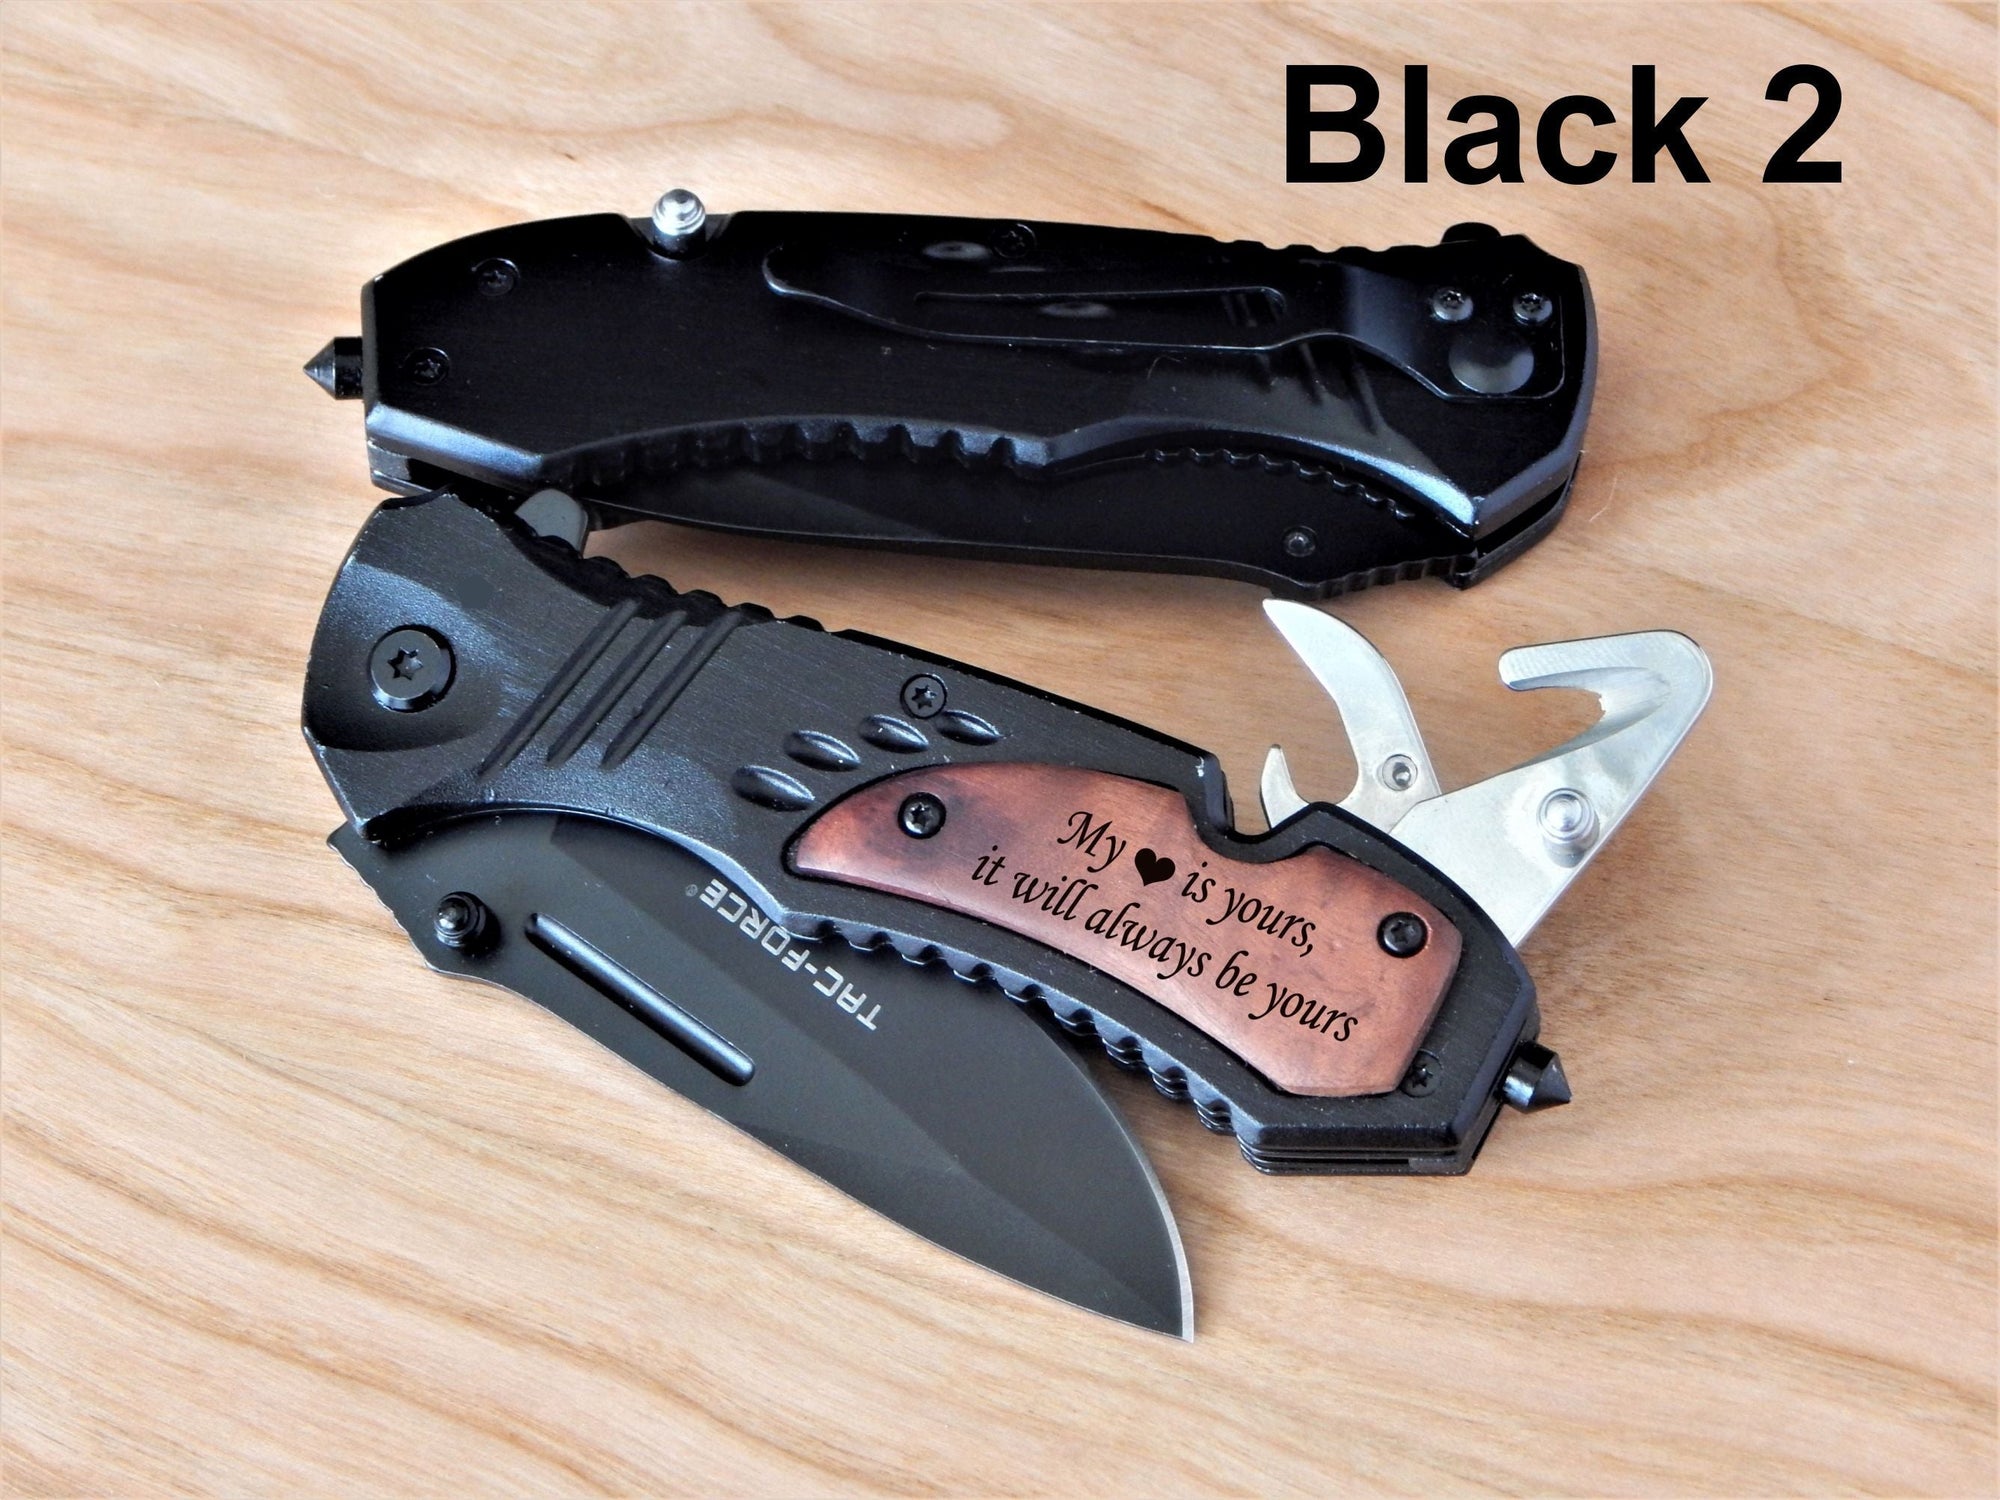 Father of the Bride Gift | Engraved Pocket Knife for in Law | Wedding Gifts